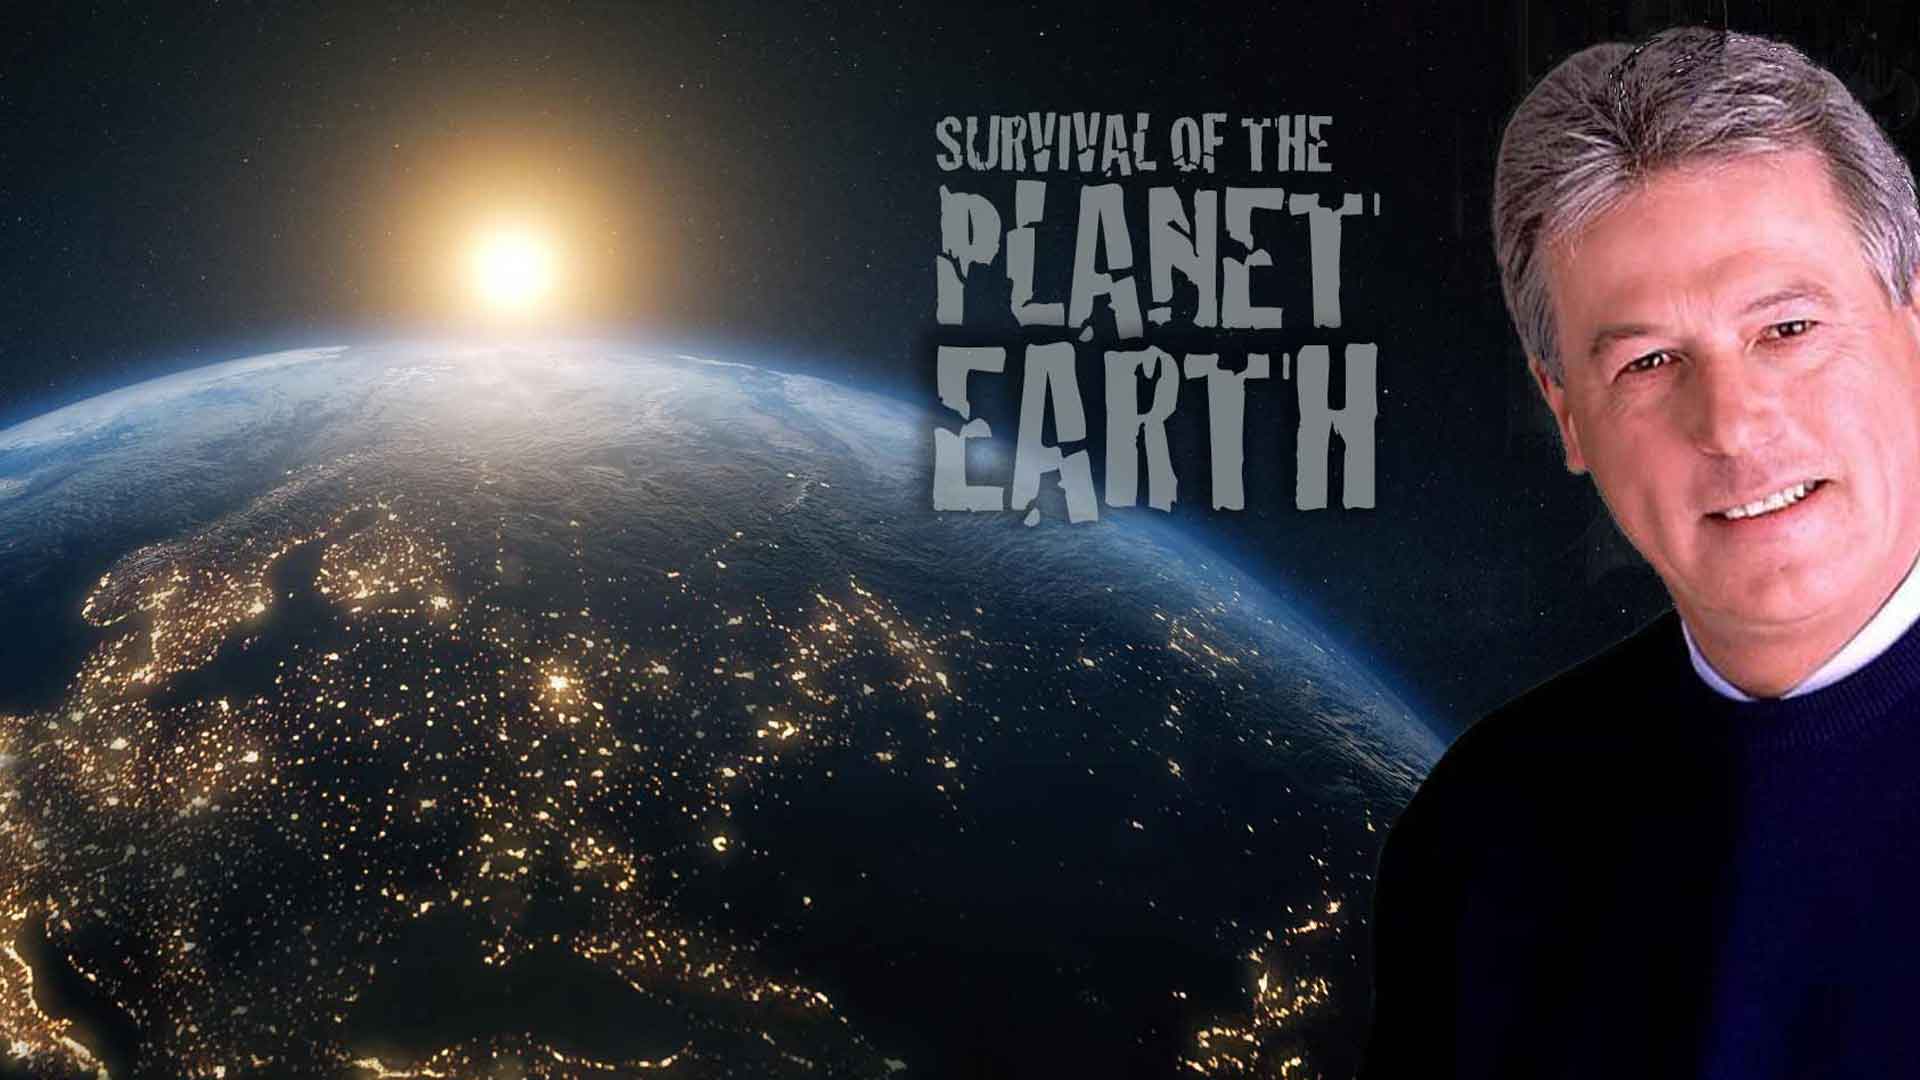 Survival of the Planet Earth